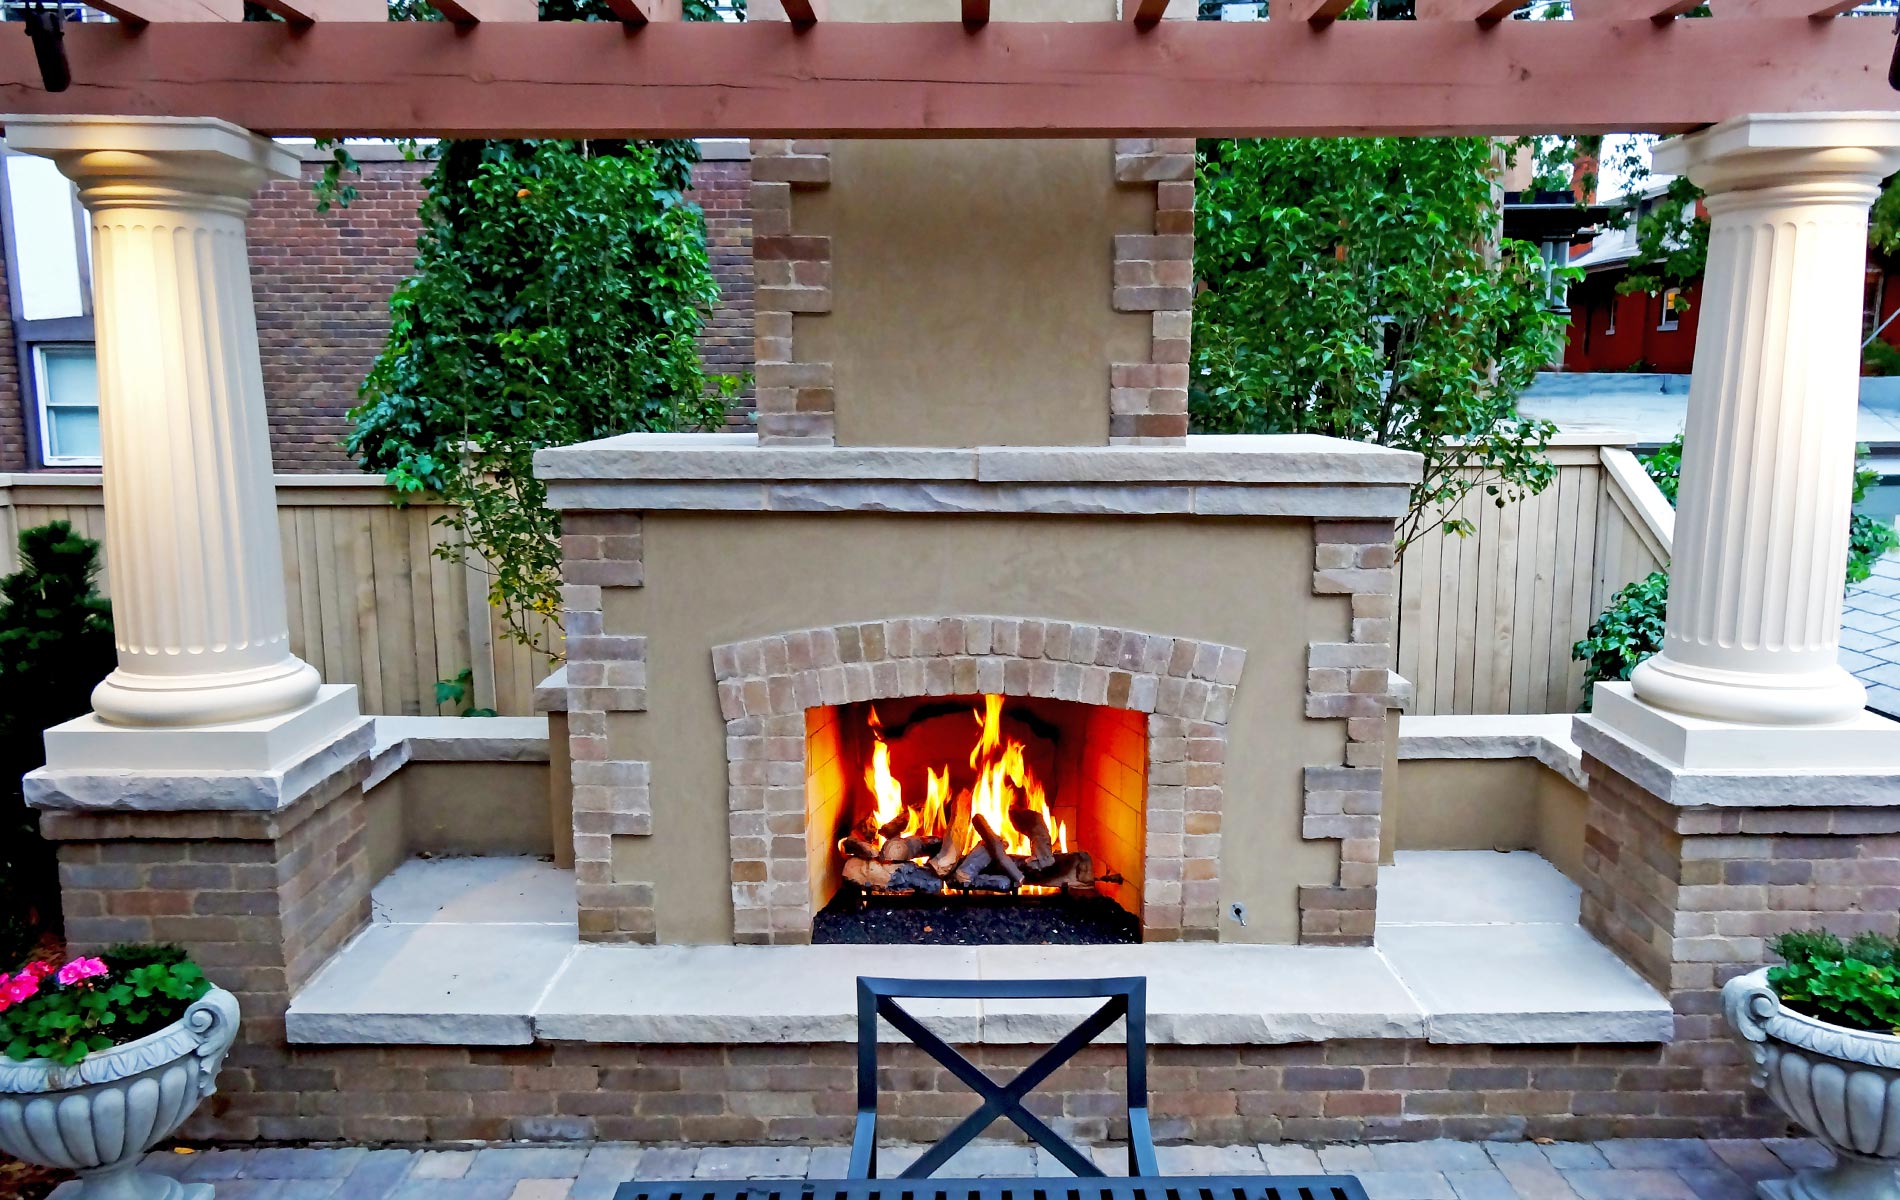 Formal Outdoor Fire Place with Brick and Stone and arbor in Historical House Courtyard Landscaped with Grand Architecture Mile High Landscaping in Denver